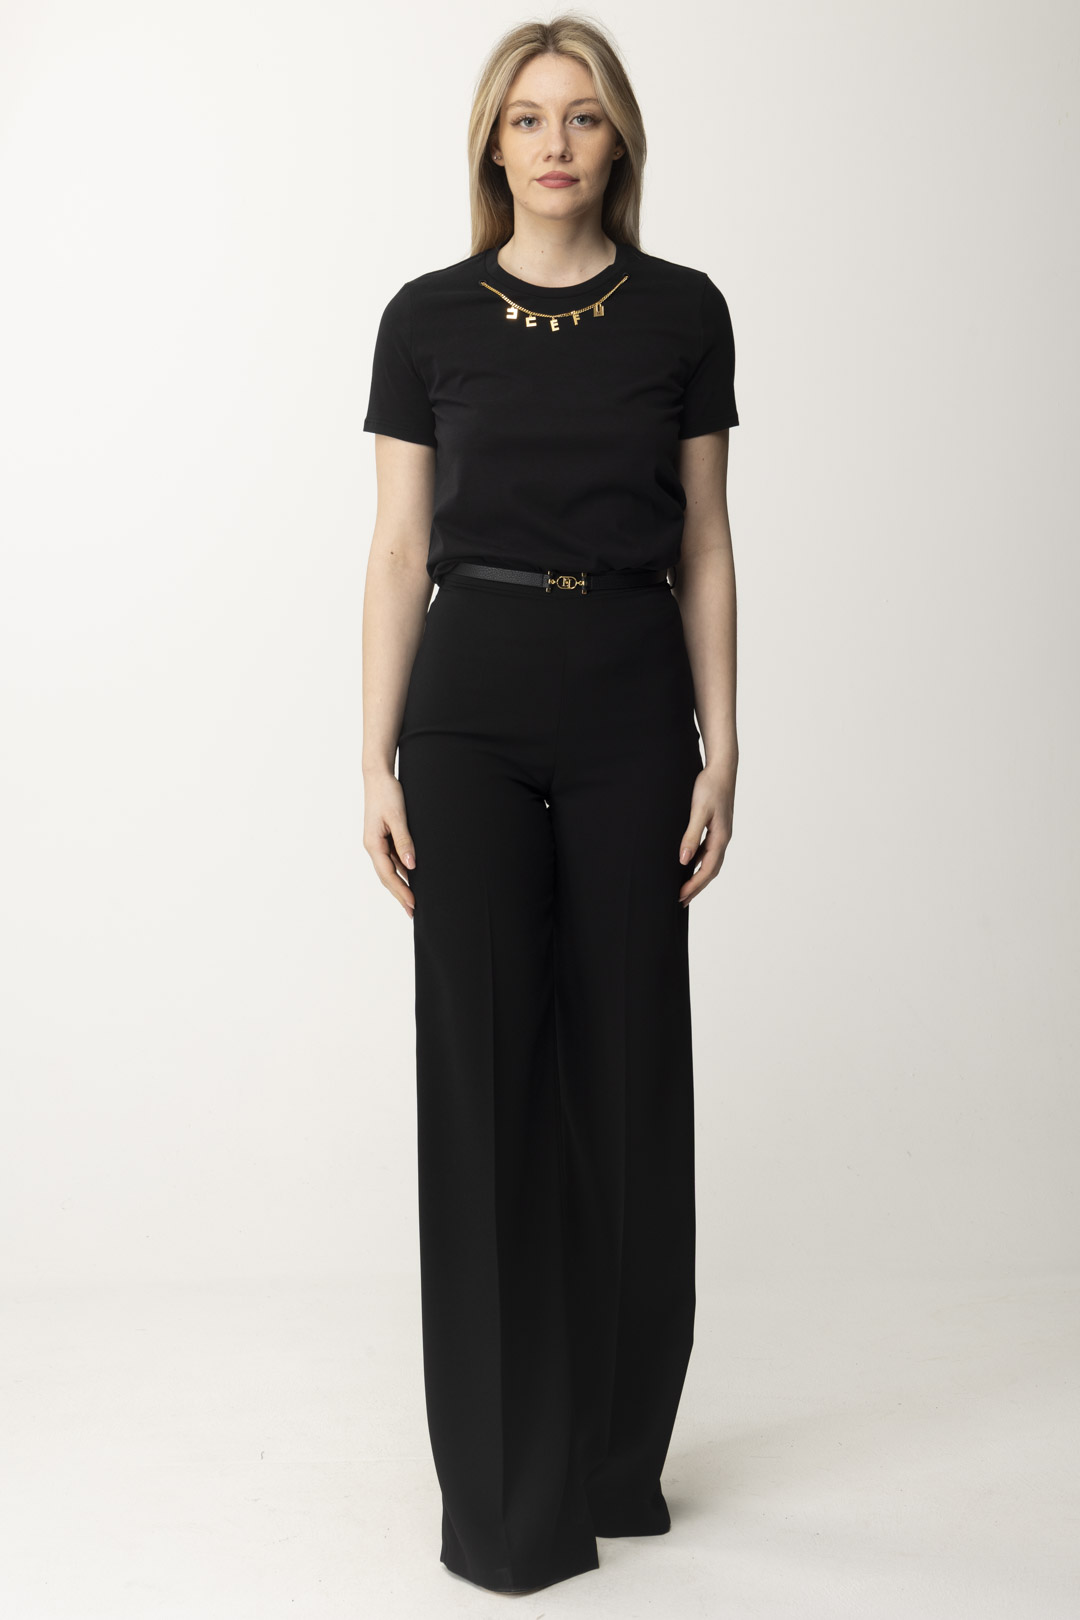 Preview: Elisabetta Franchi T-shirt with Charm Necklace Nero